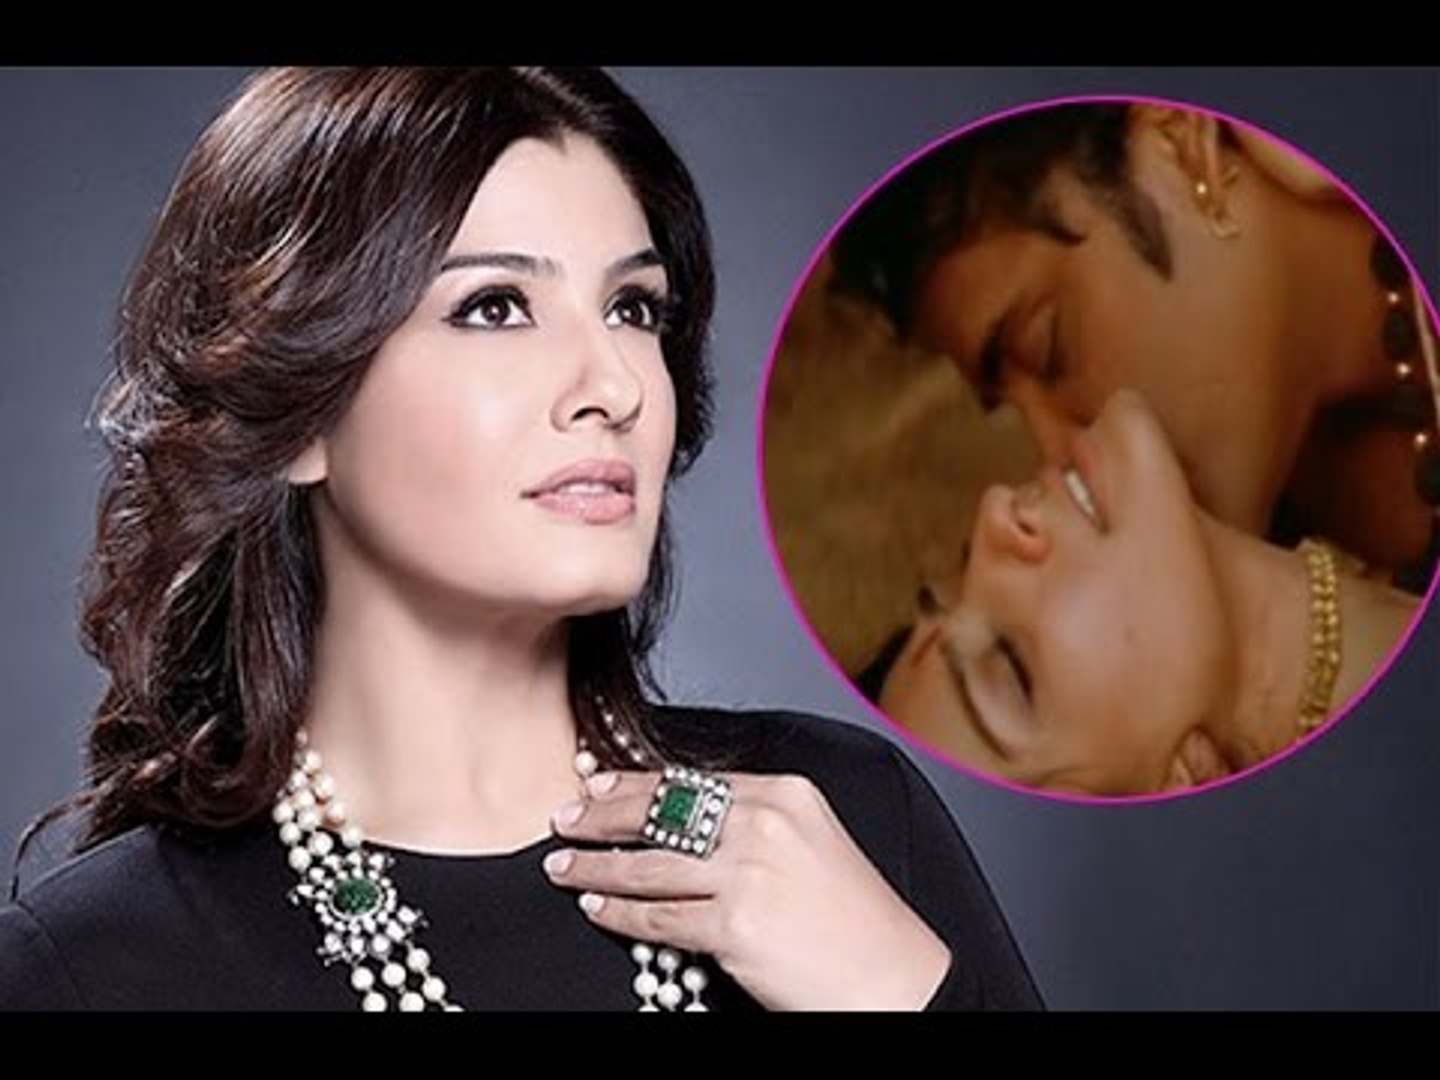 Sanjay Sex Video - Raveena Tandon Says Sex is Over Rated in Bollywood - video Dailymotion